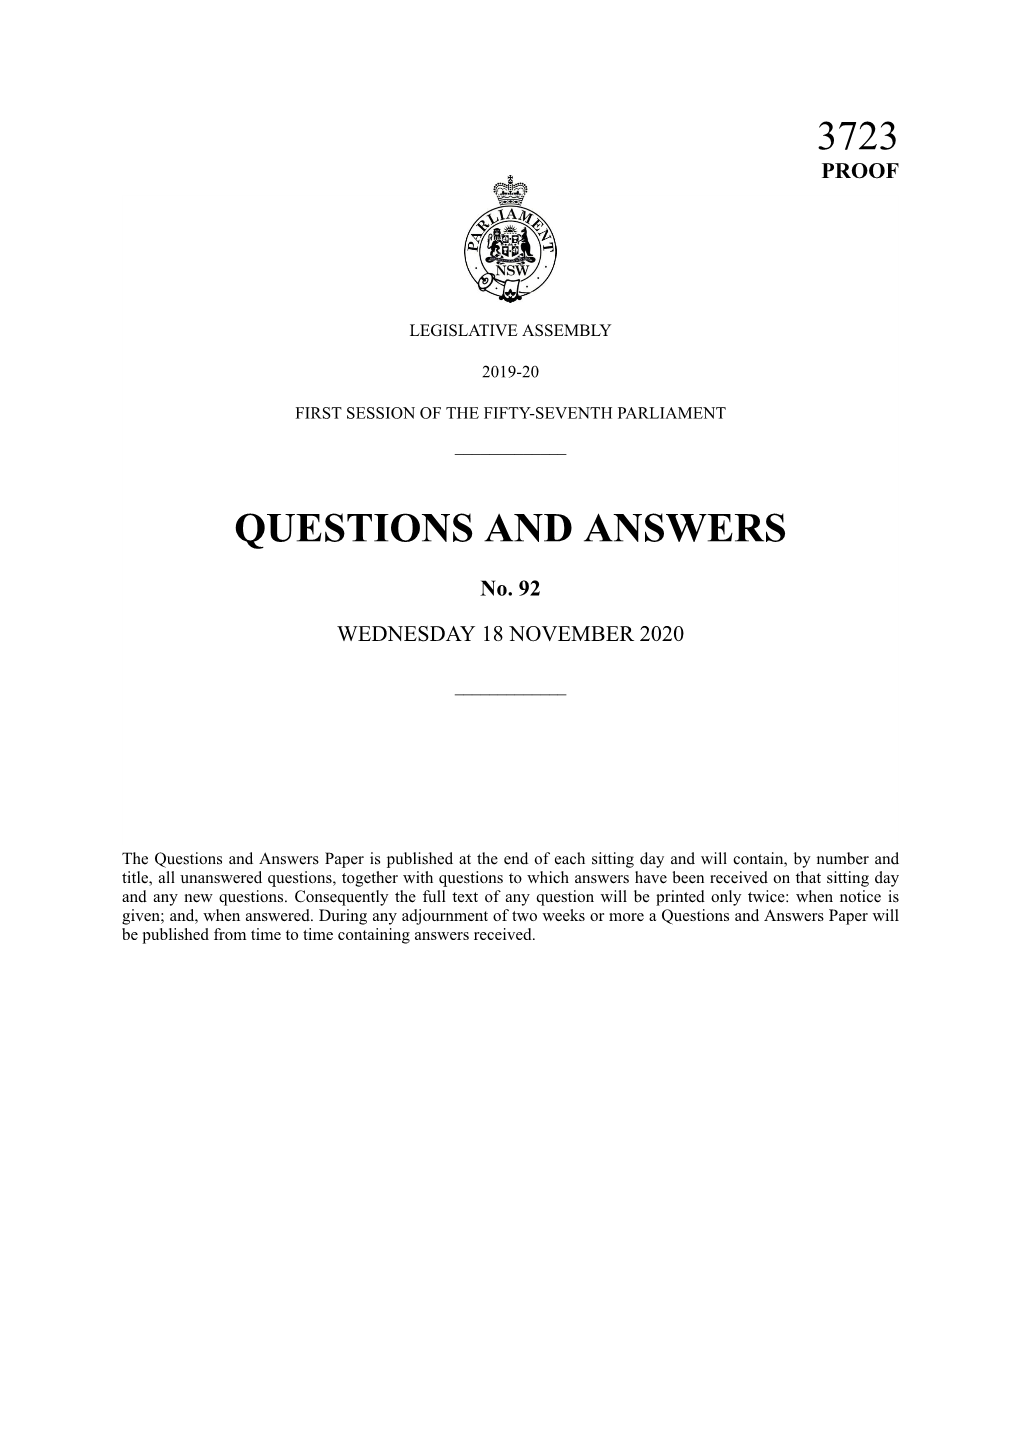 Questions & Answers Paper No. 92